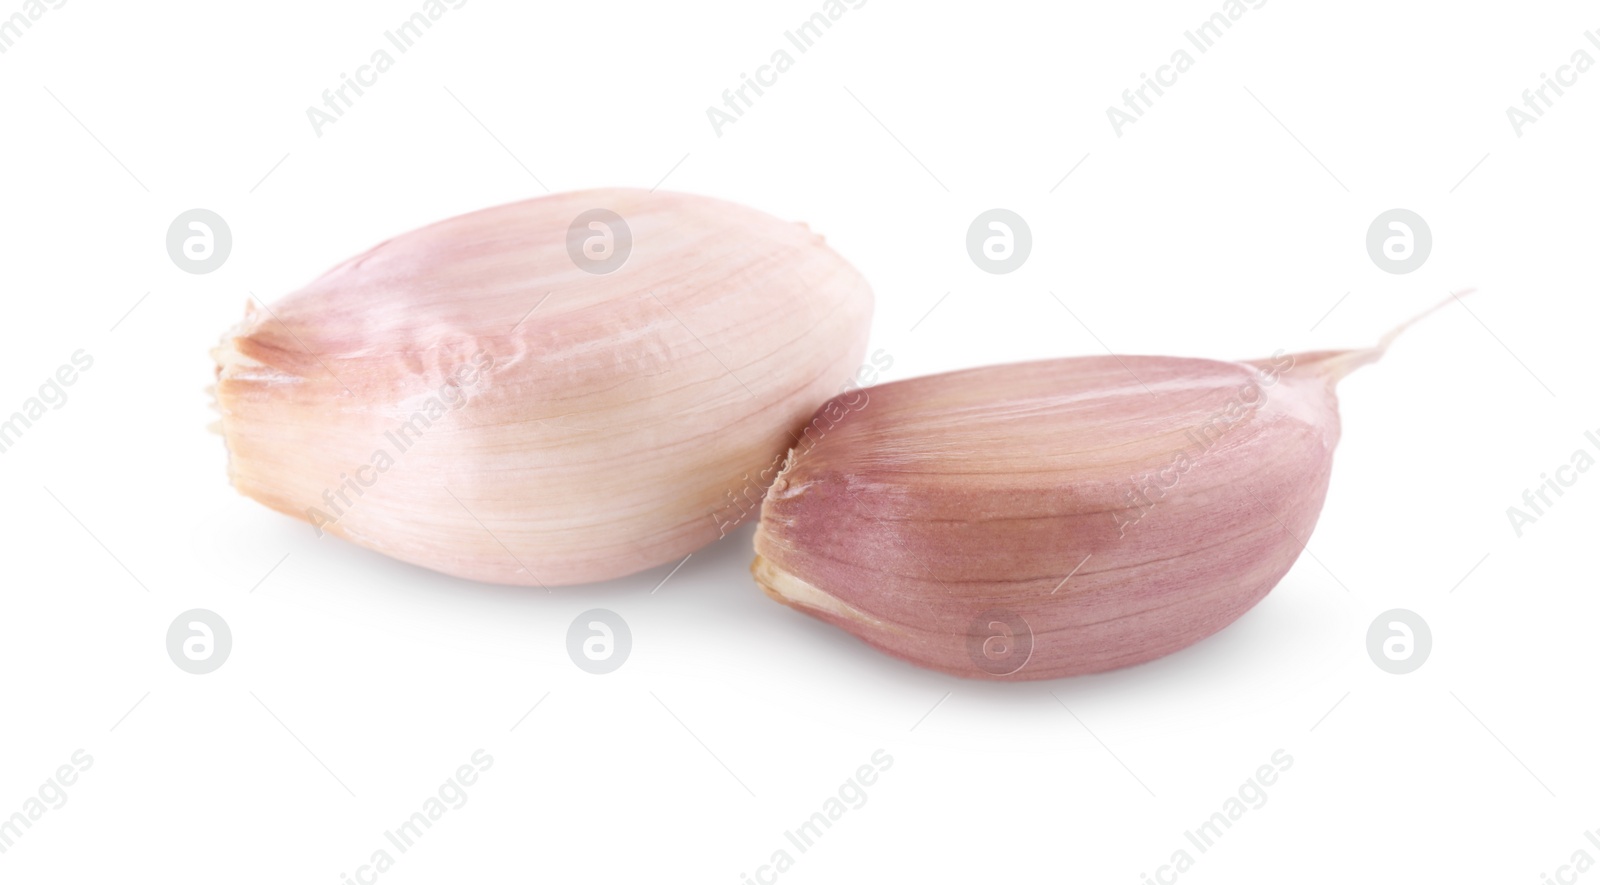 Photo of Unpeeled cloves of fresh garlic isolated on white